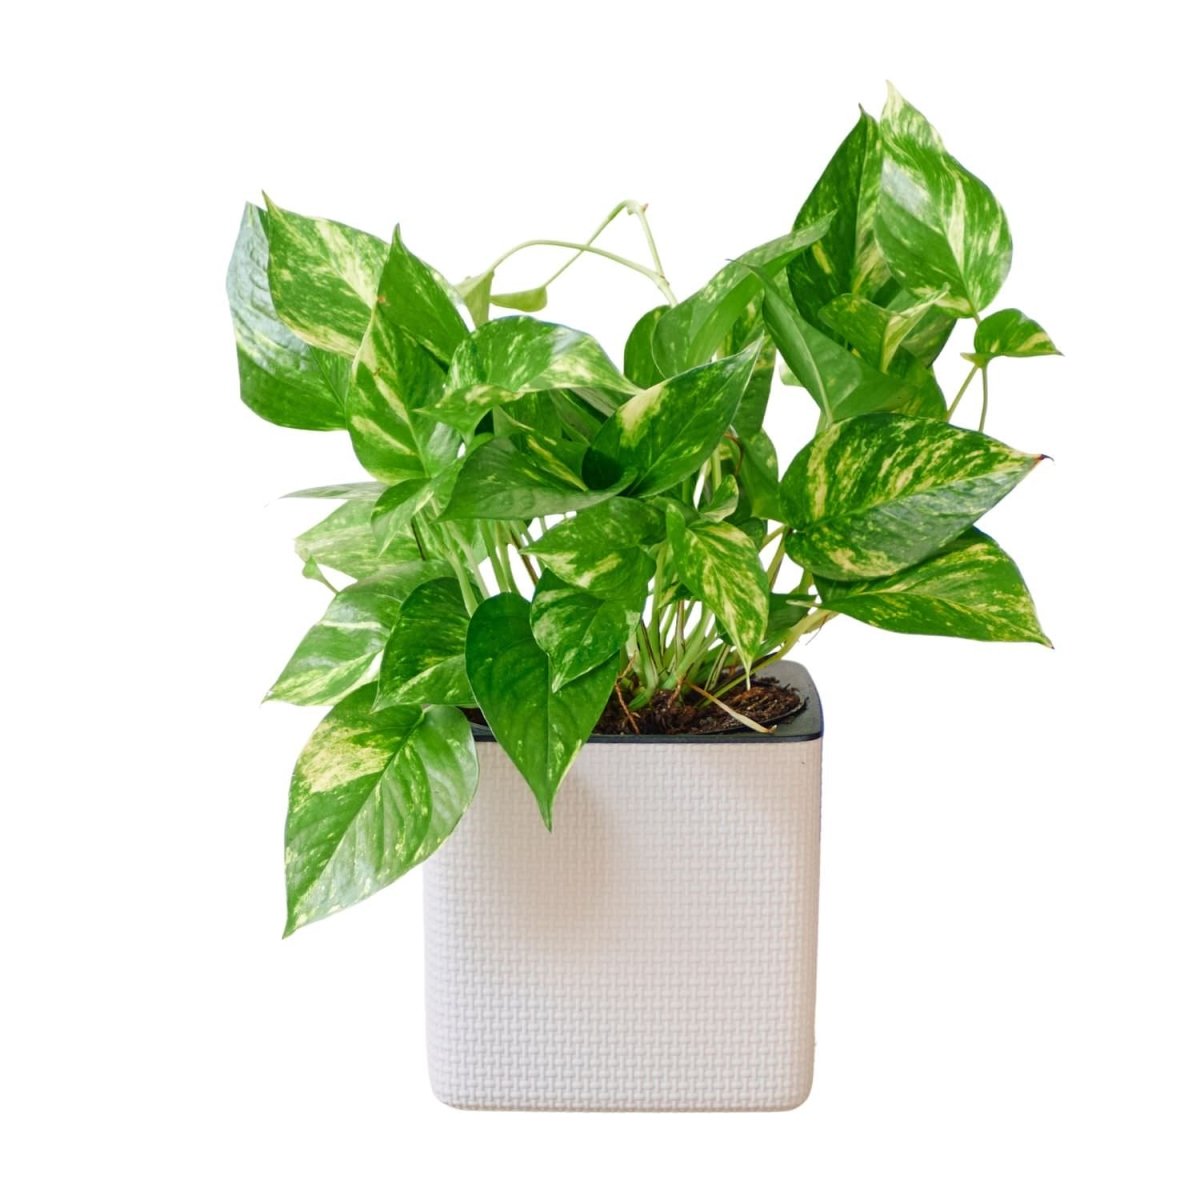 Pothos Placed In Lechuza Cube 16 Planter - Sand Brown - My City Plants